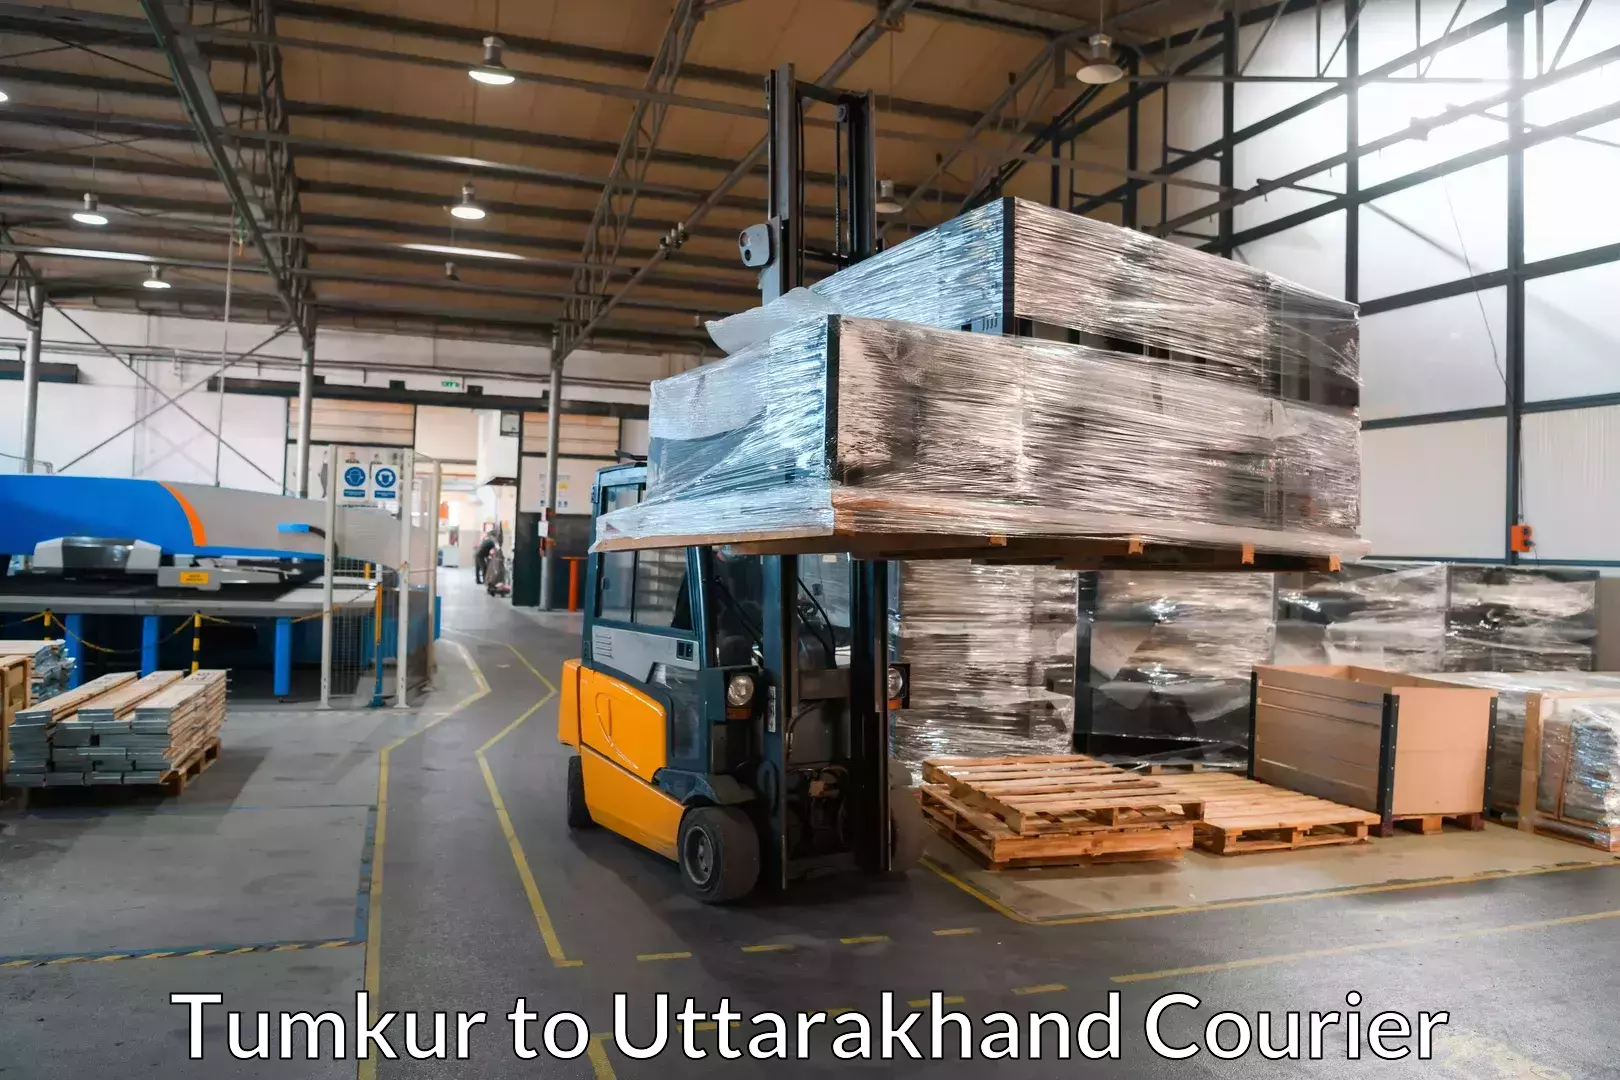 Furniture transport service in Tumkur to IIT Roorkee